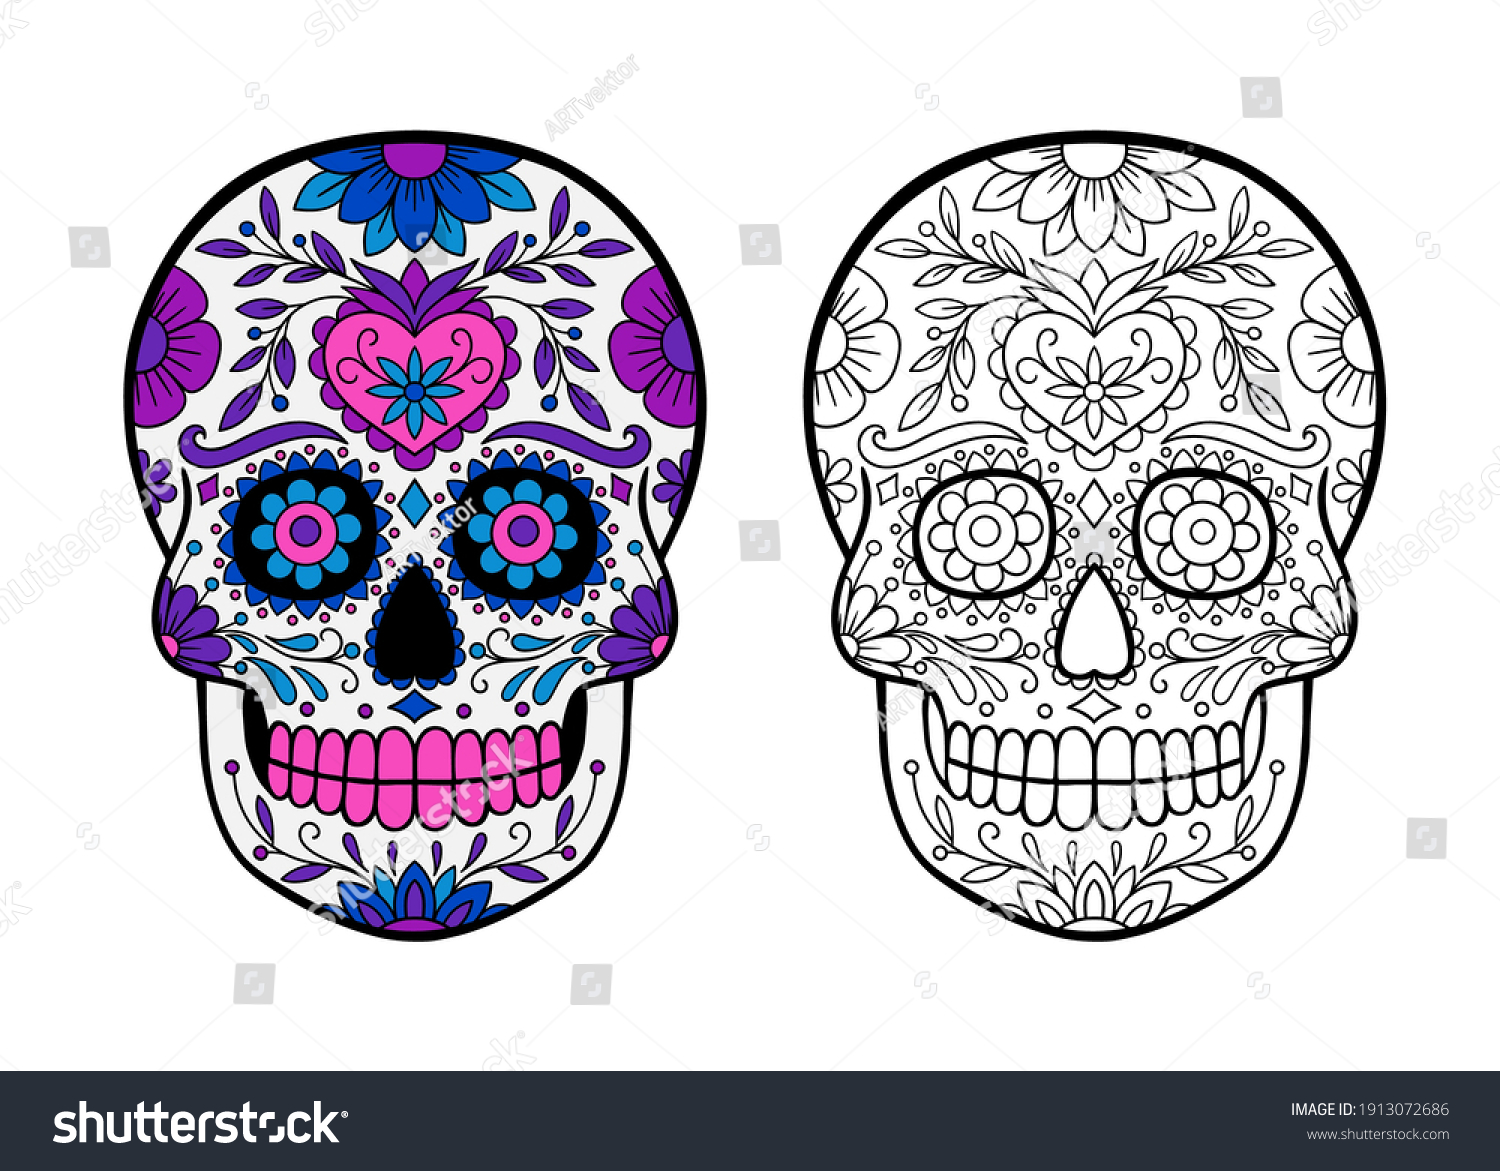 Day dead skull coloring pages royalty